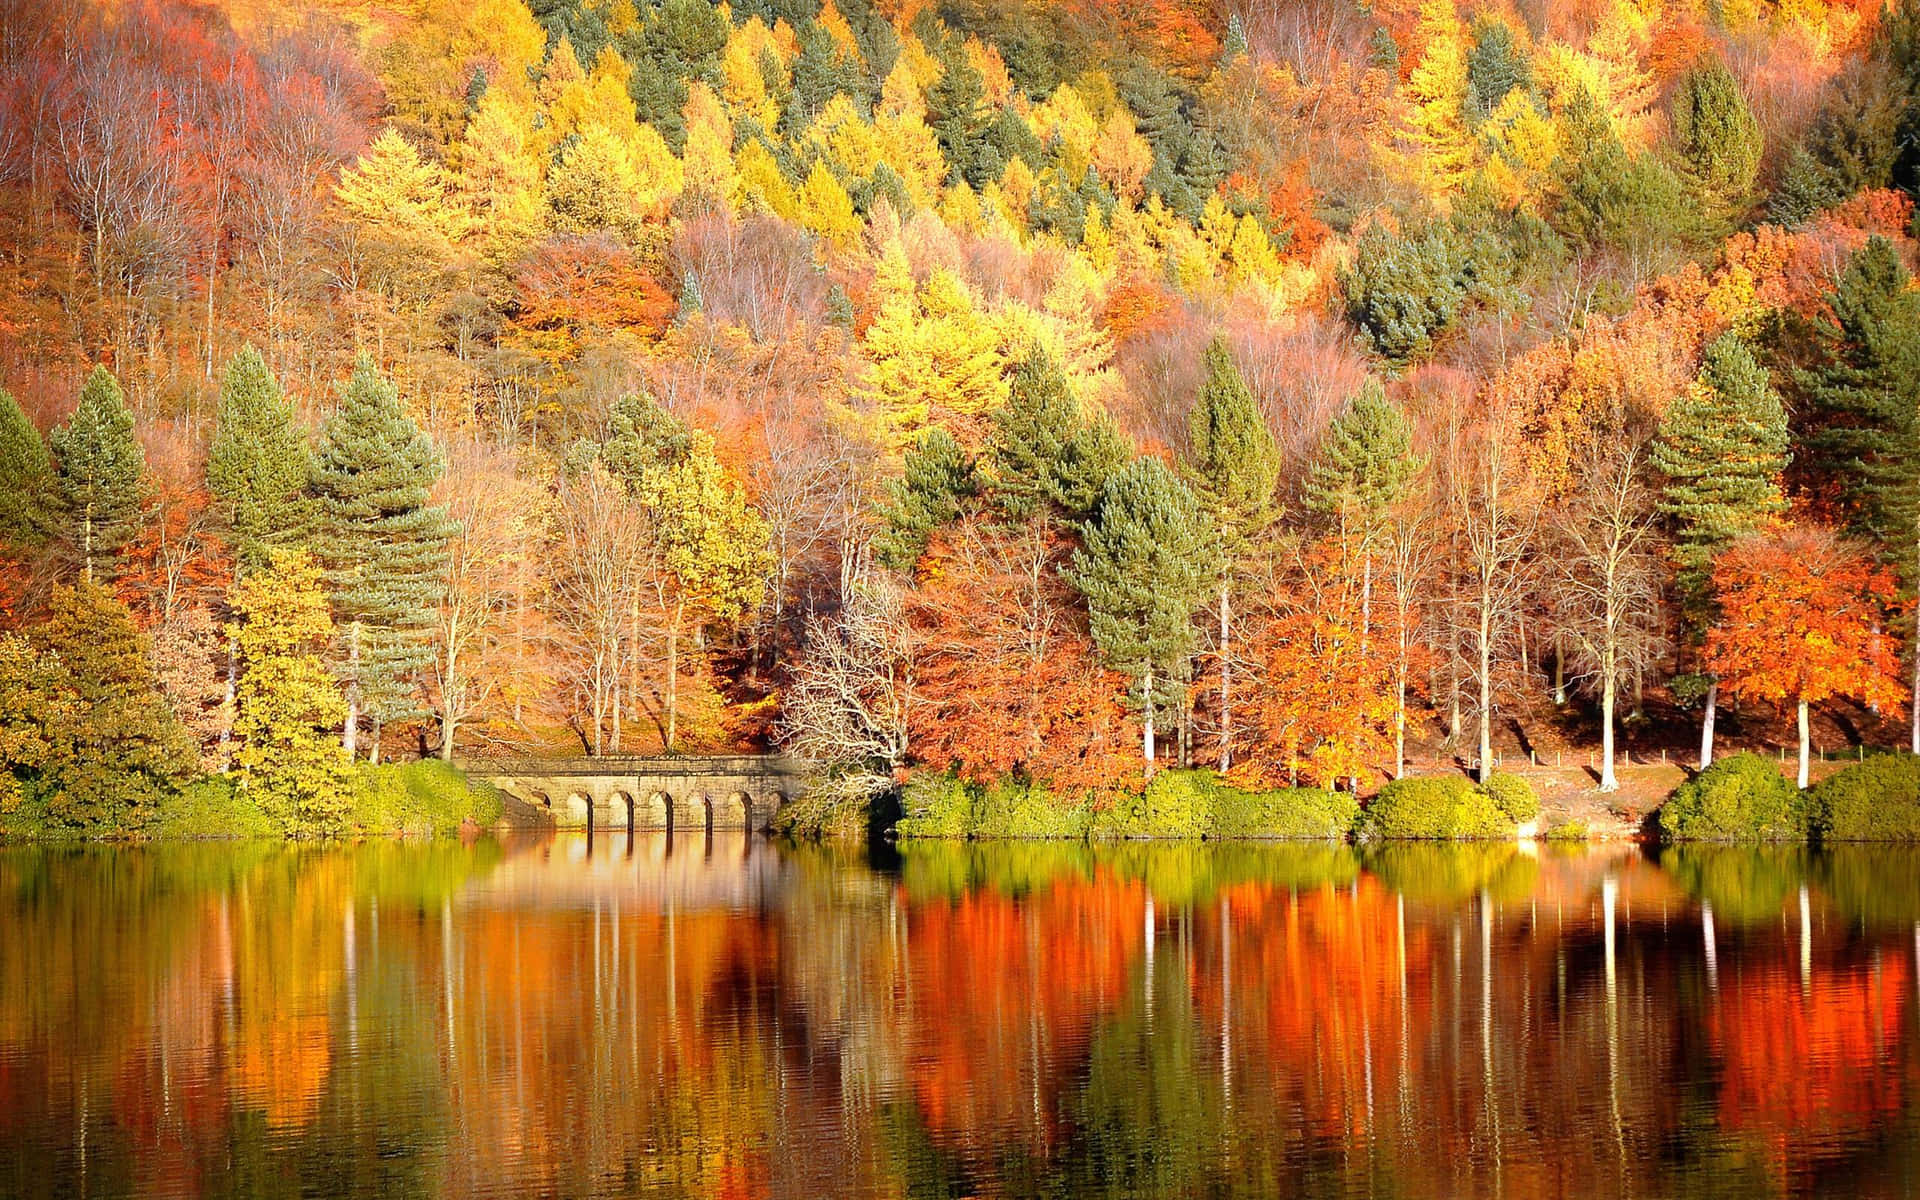 Nature in its most beautiful form-- an autumnal landscape brimming with gorgeous fall colors. Wallpaper